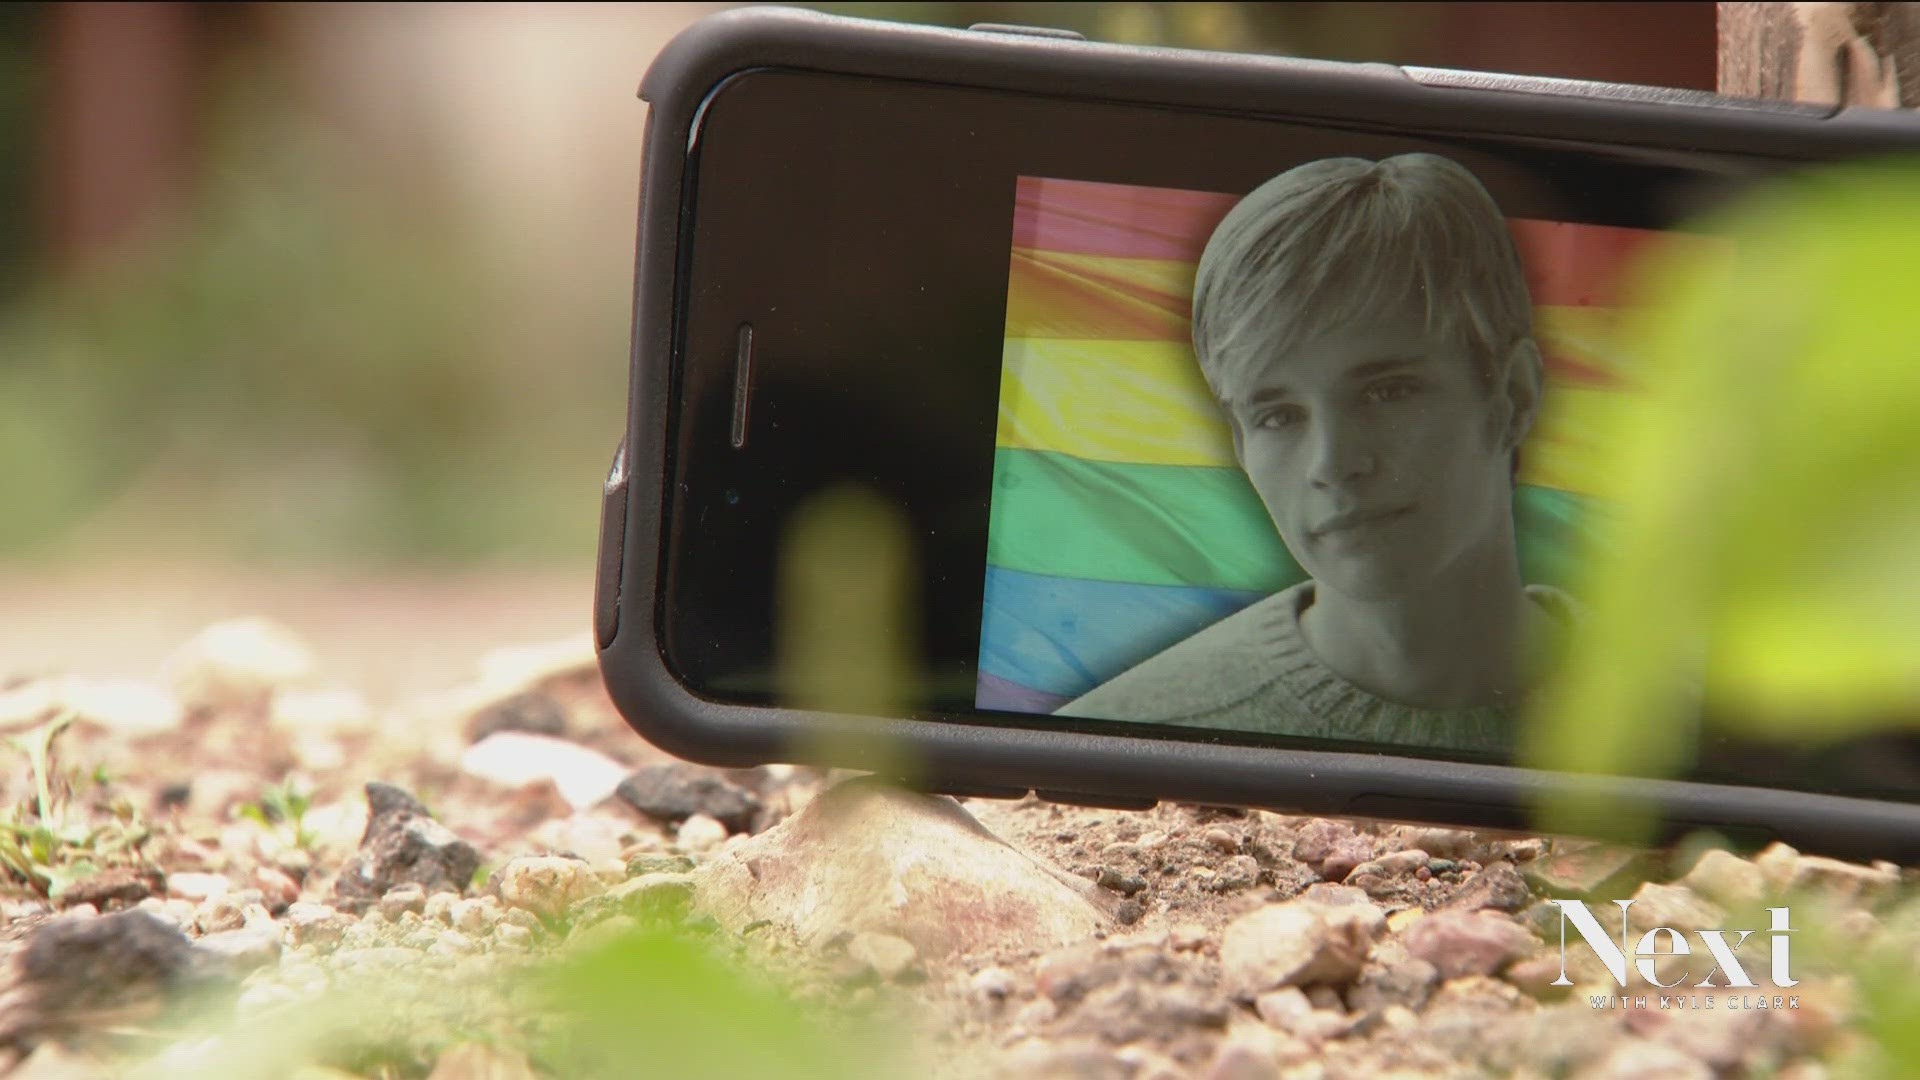 For many across the country, Laramie, Wy. is synonymous with the murder of Matthew Shepard. Young queer residents say it has made progress.